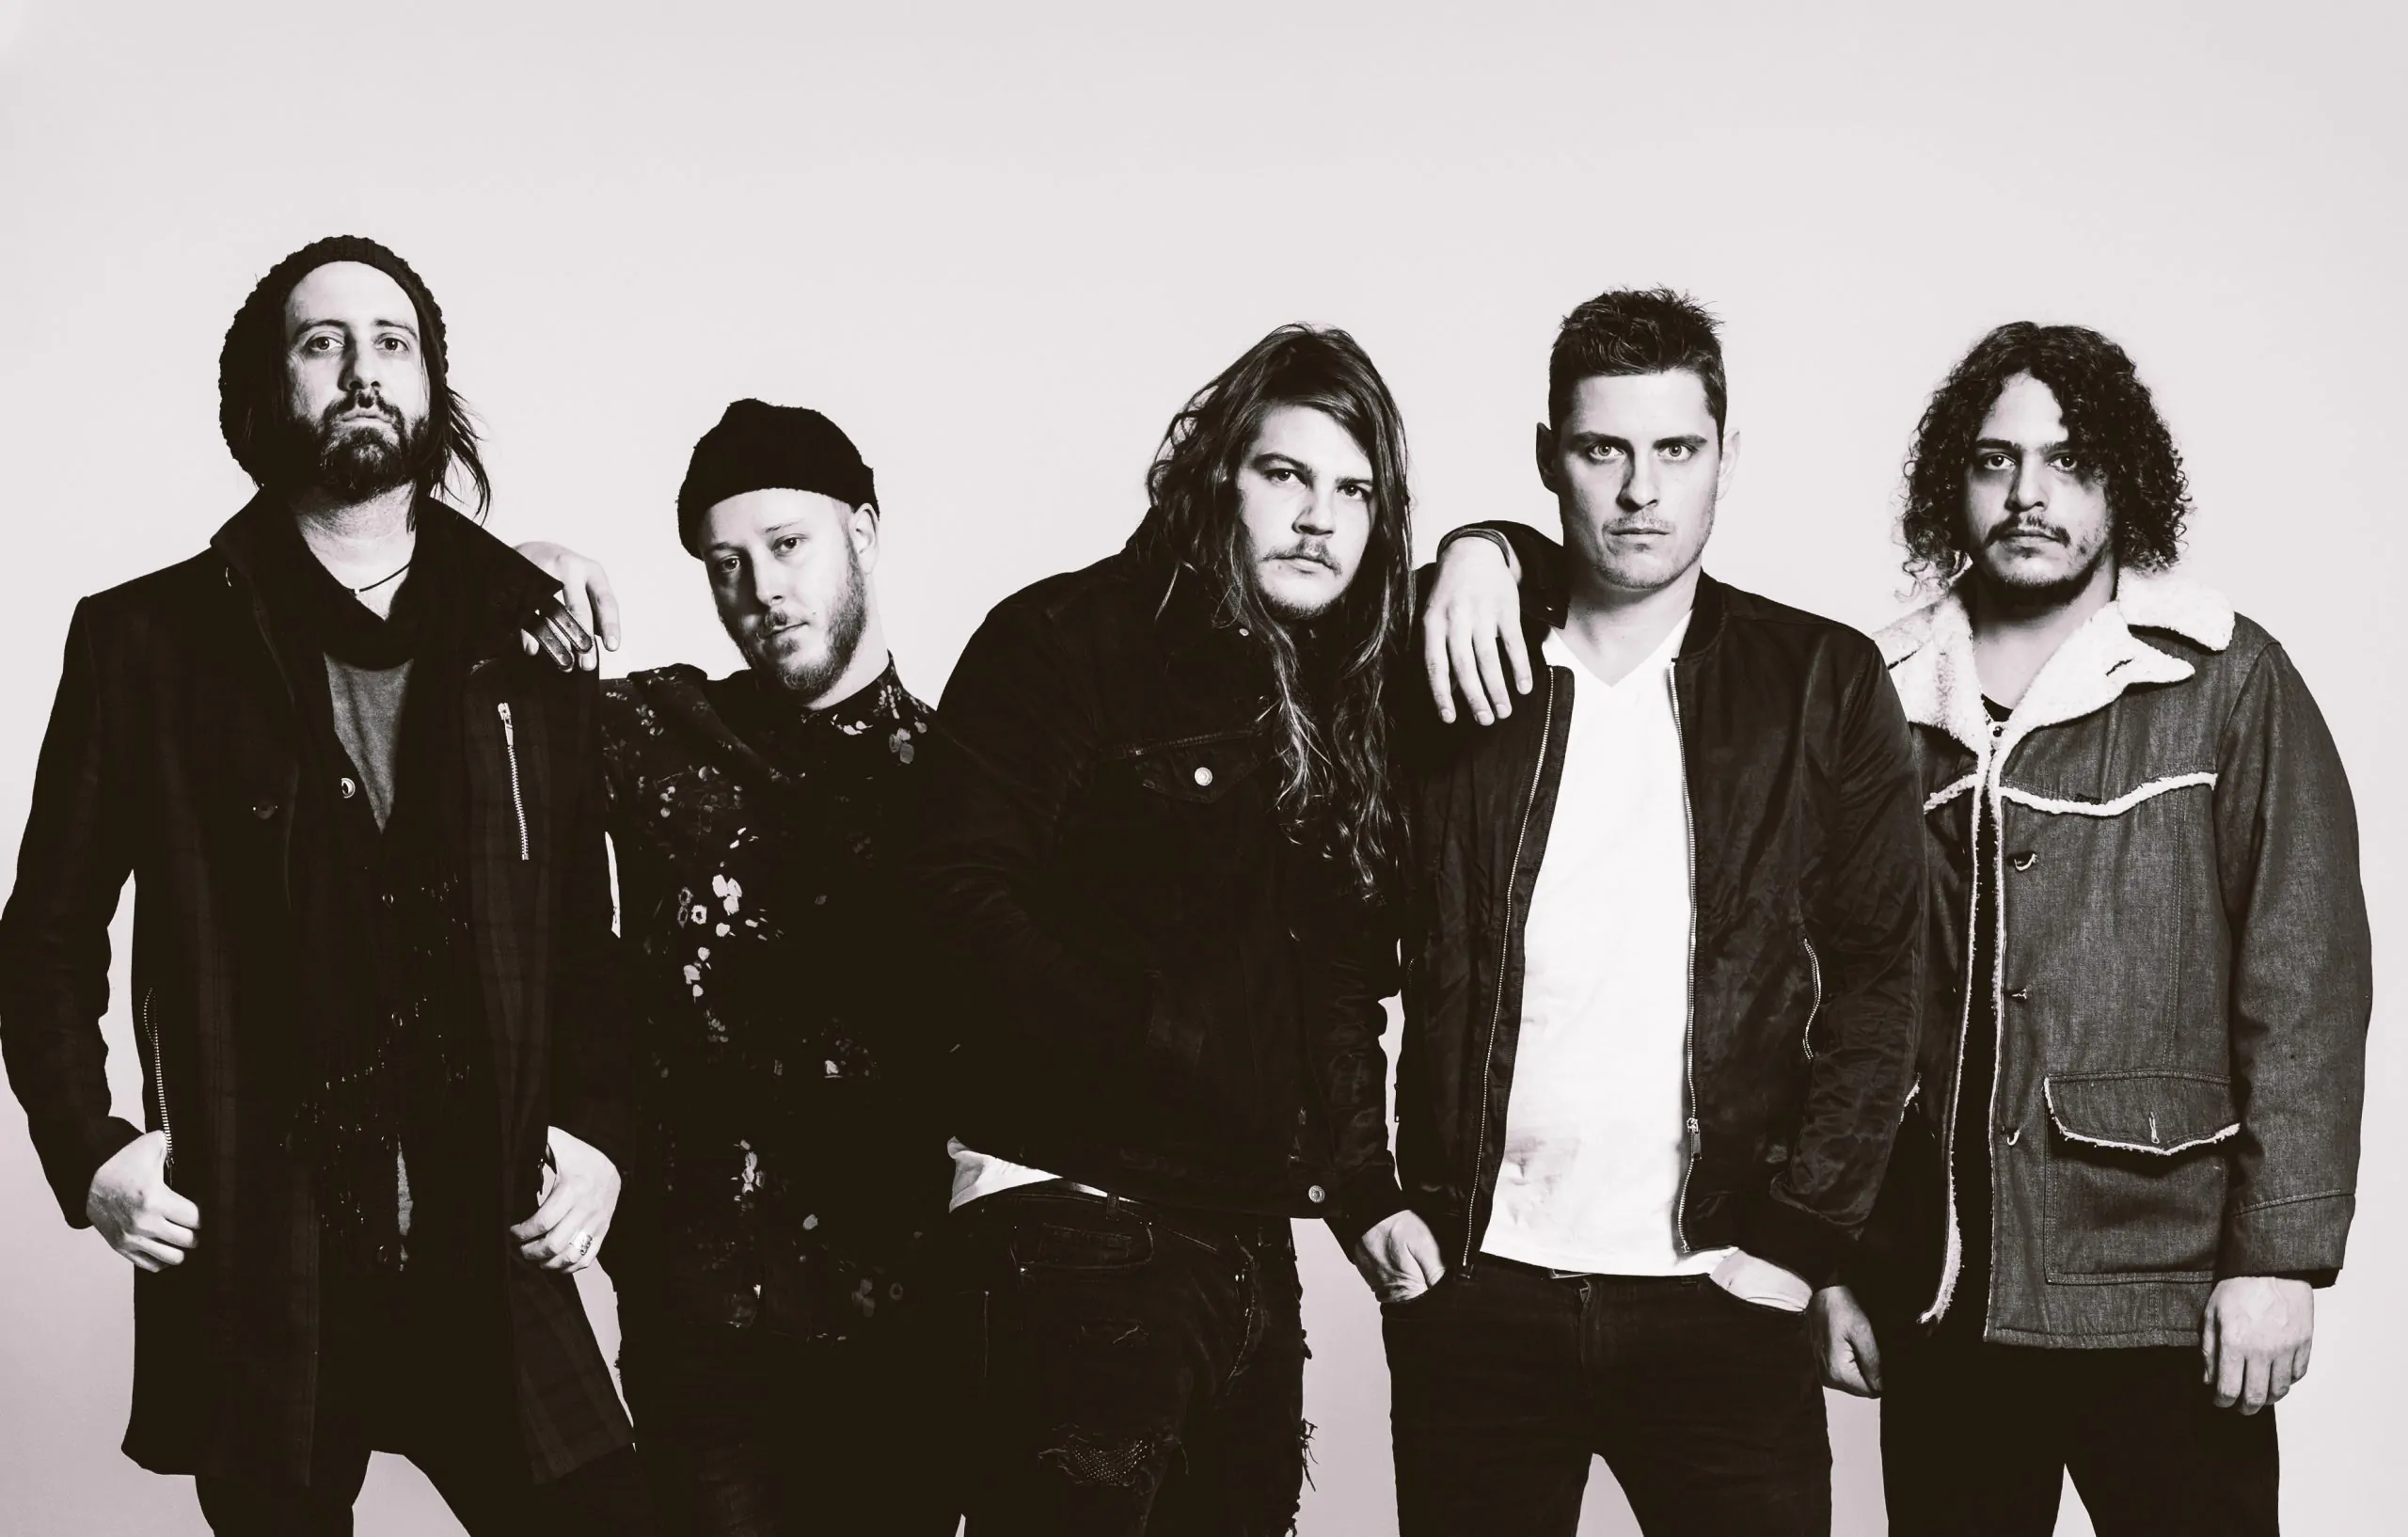 THE GLORIOUS SONS reveal new song ‘Don’t Live Fast’ – Listen Now